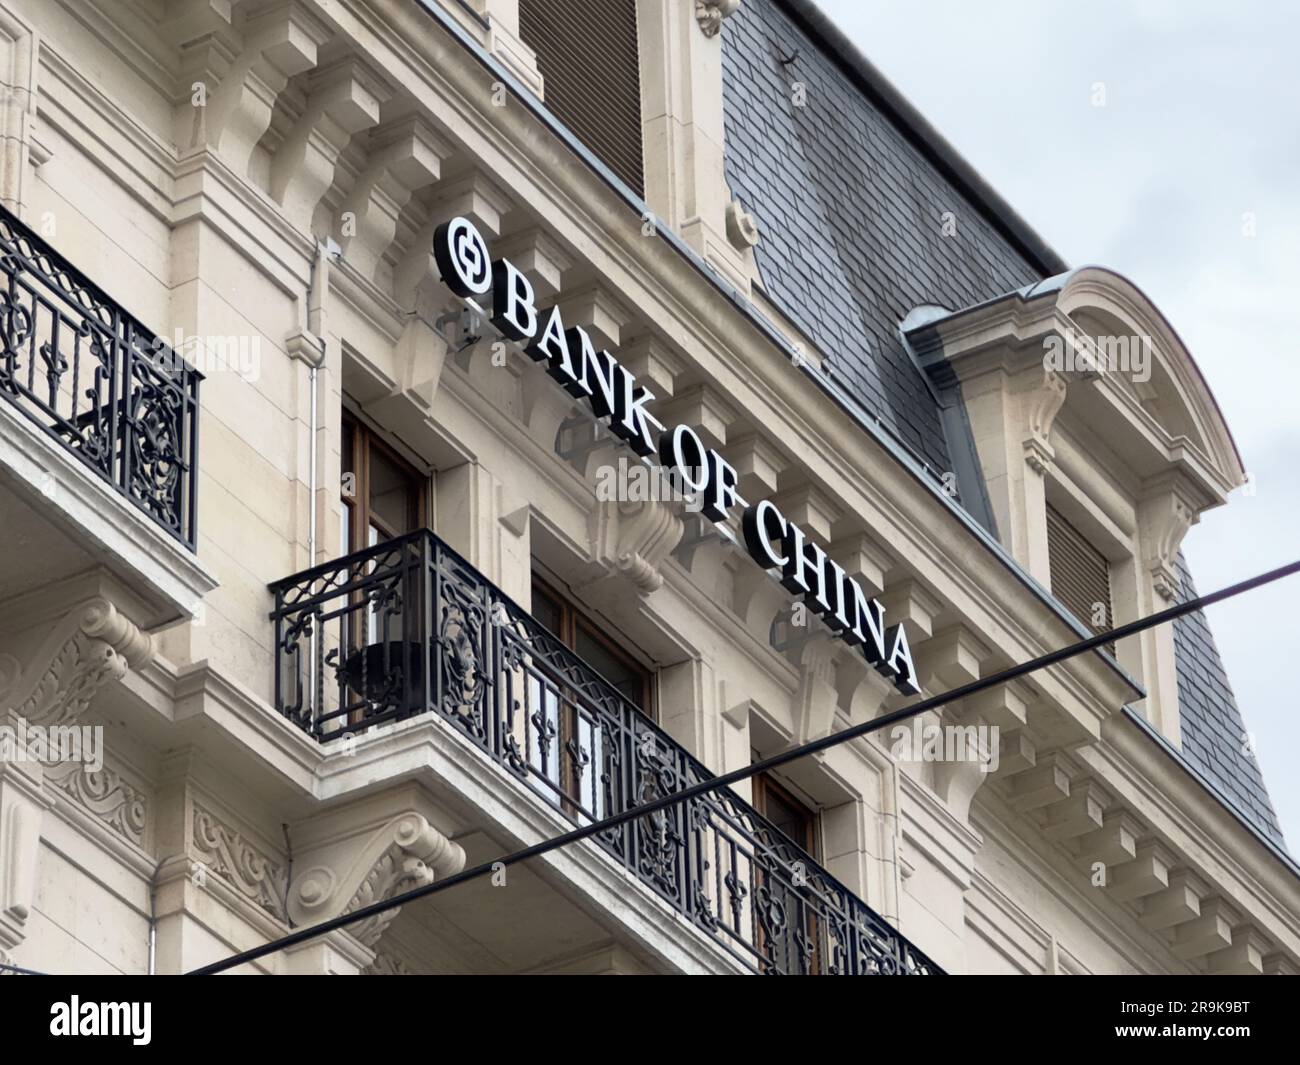 Geneva, Switzerland - Jan 14, 2023: Bank of China logo in Geneva. Bank of China is one of the four biggest state-owned commercial banks in China. Stock Photo